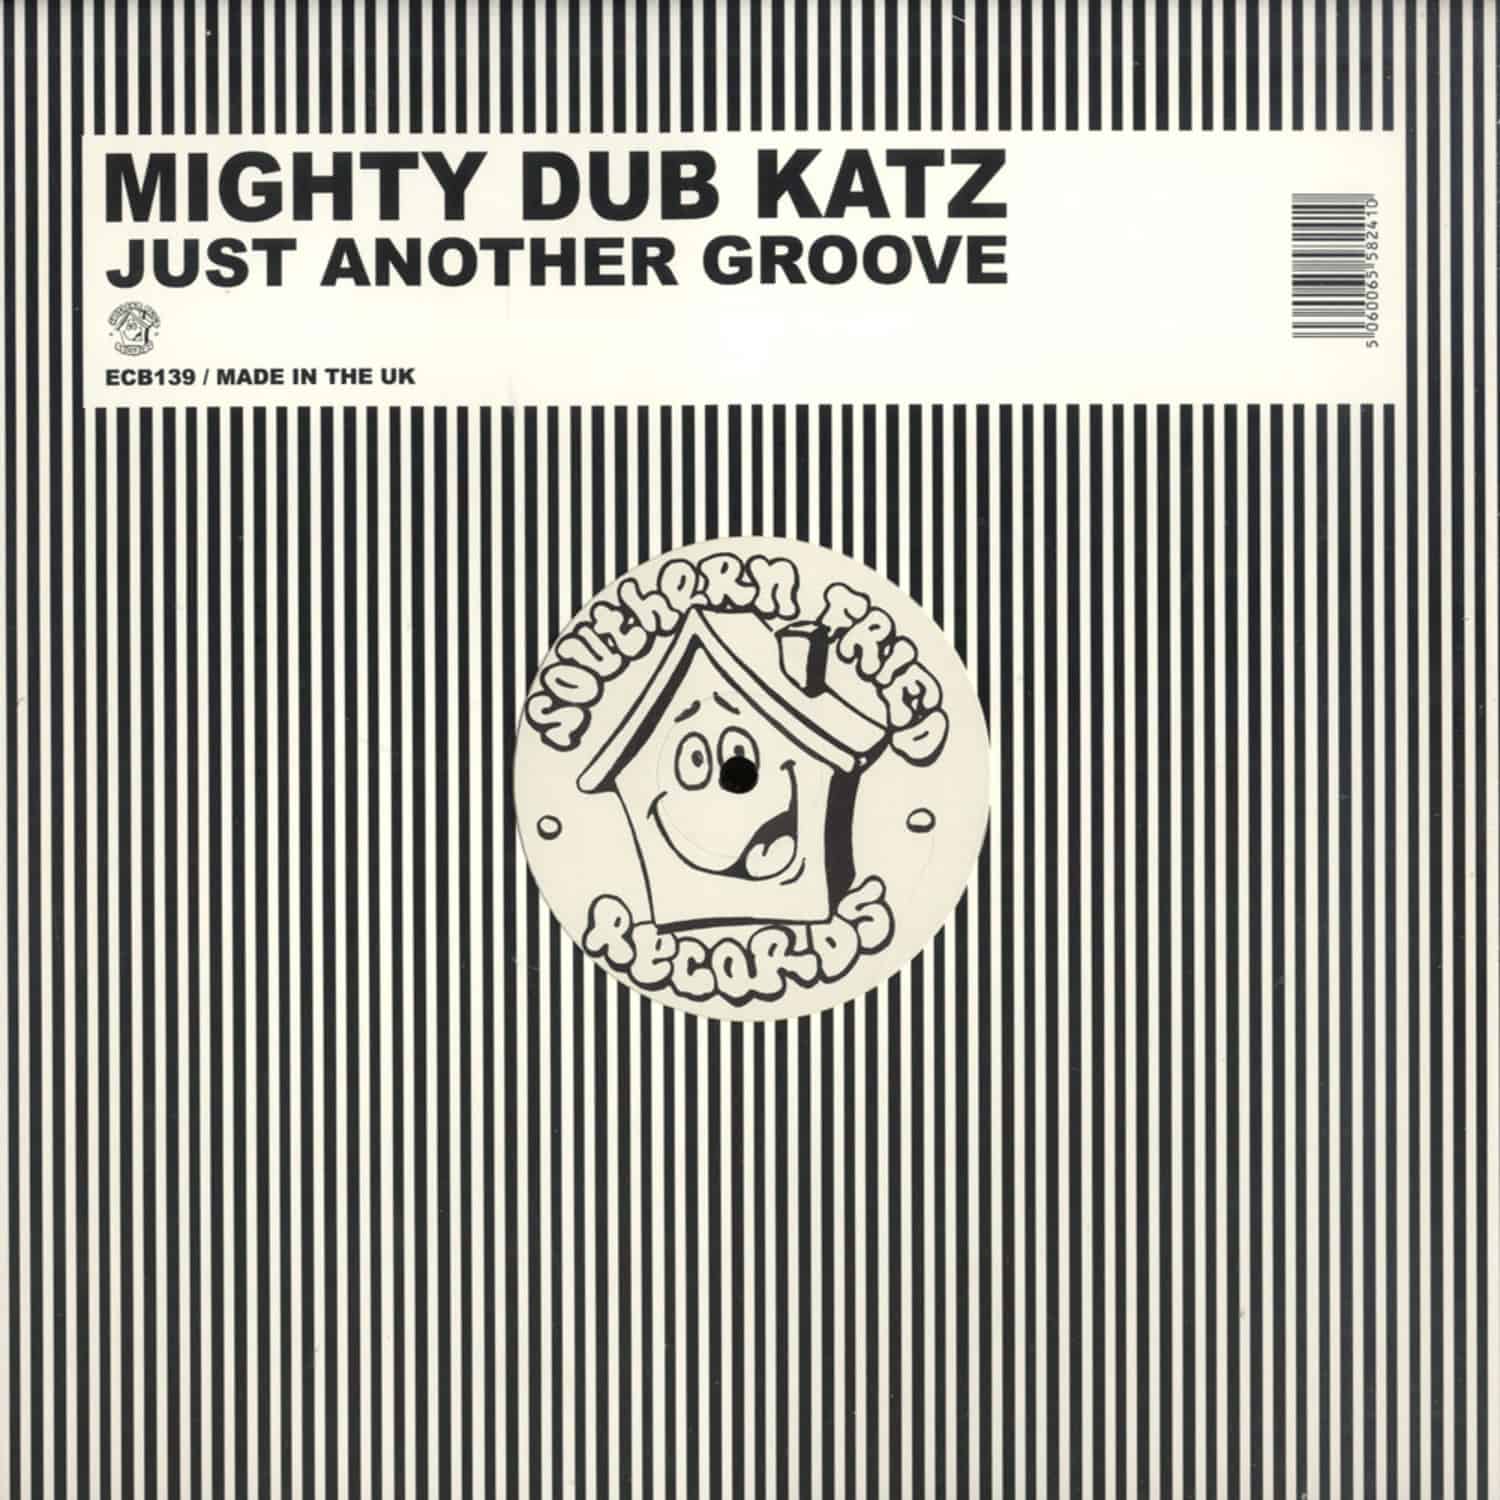 Mighty Dub Katz - JUST ANOTHER GROOVE